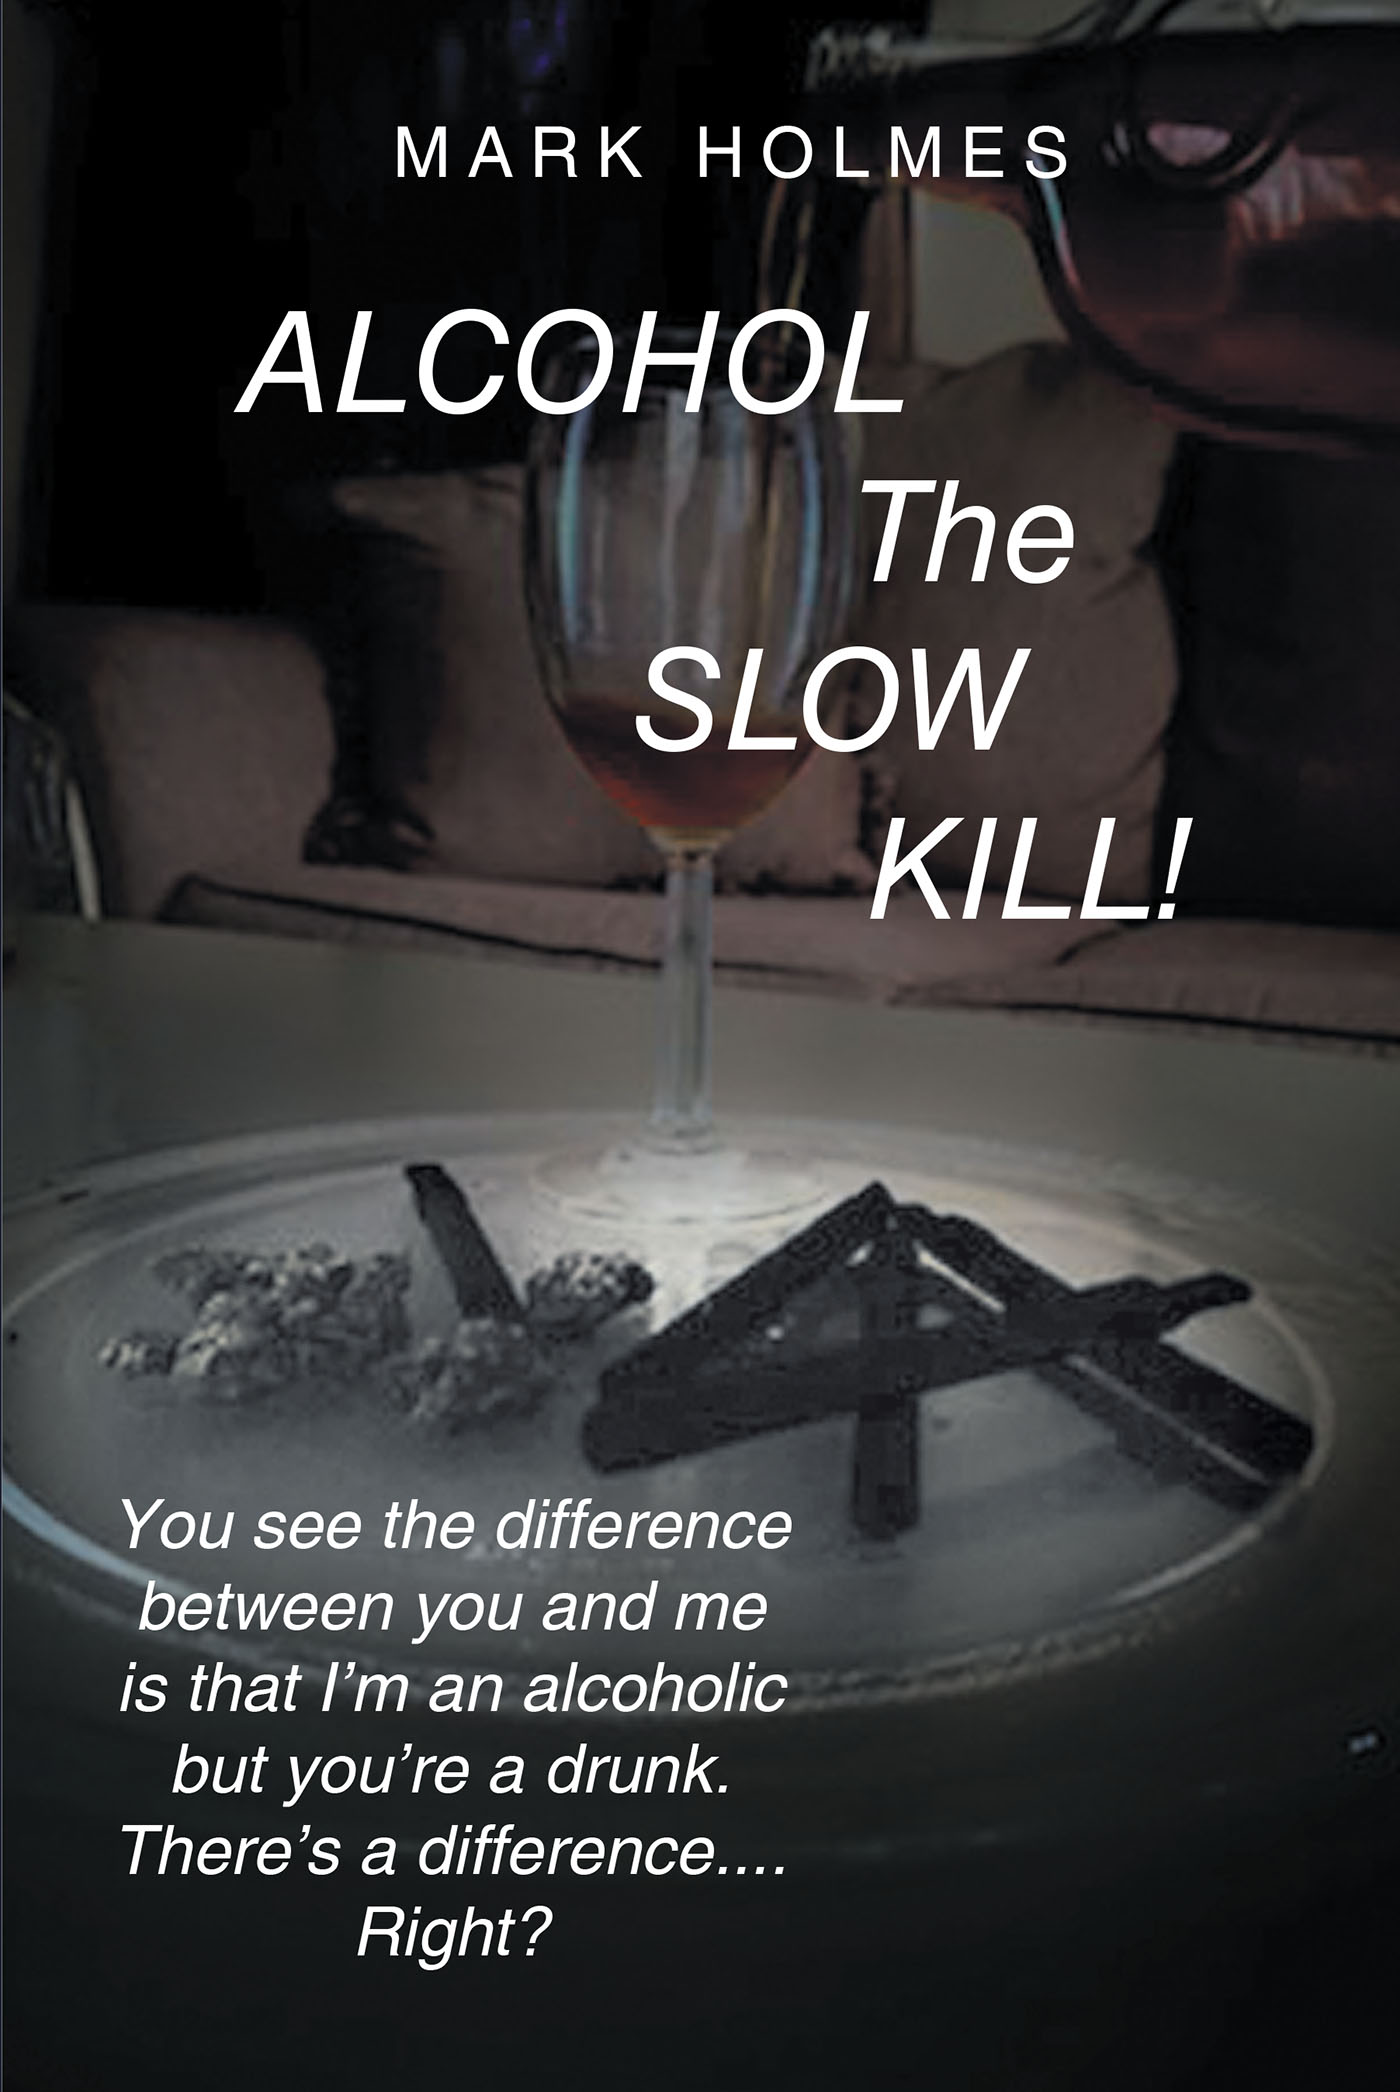 Alcohol Cover Image